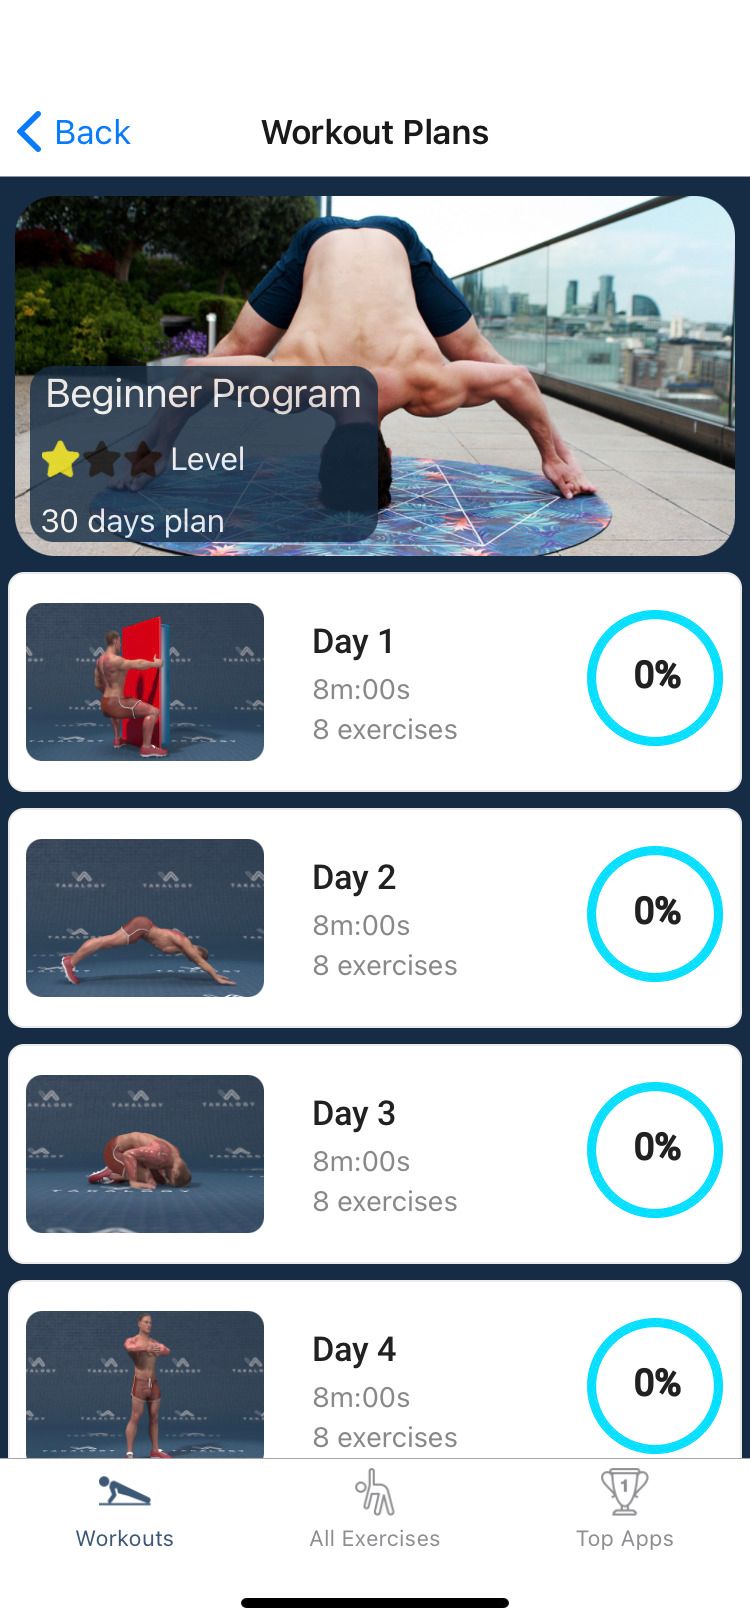 Try These 4 iOS Apps to Build a Stronger Back and Help Reduce Pain